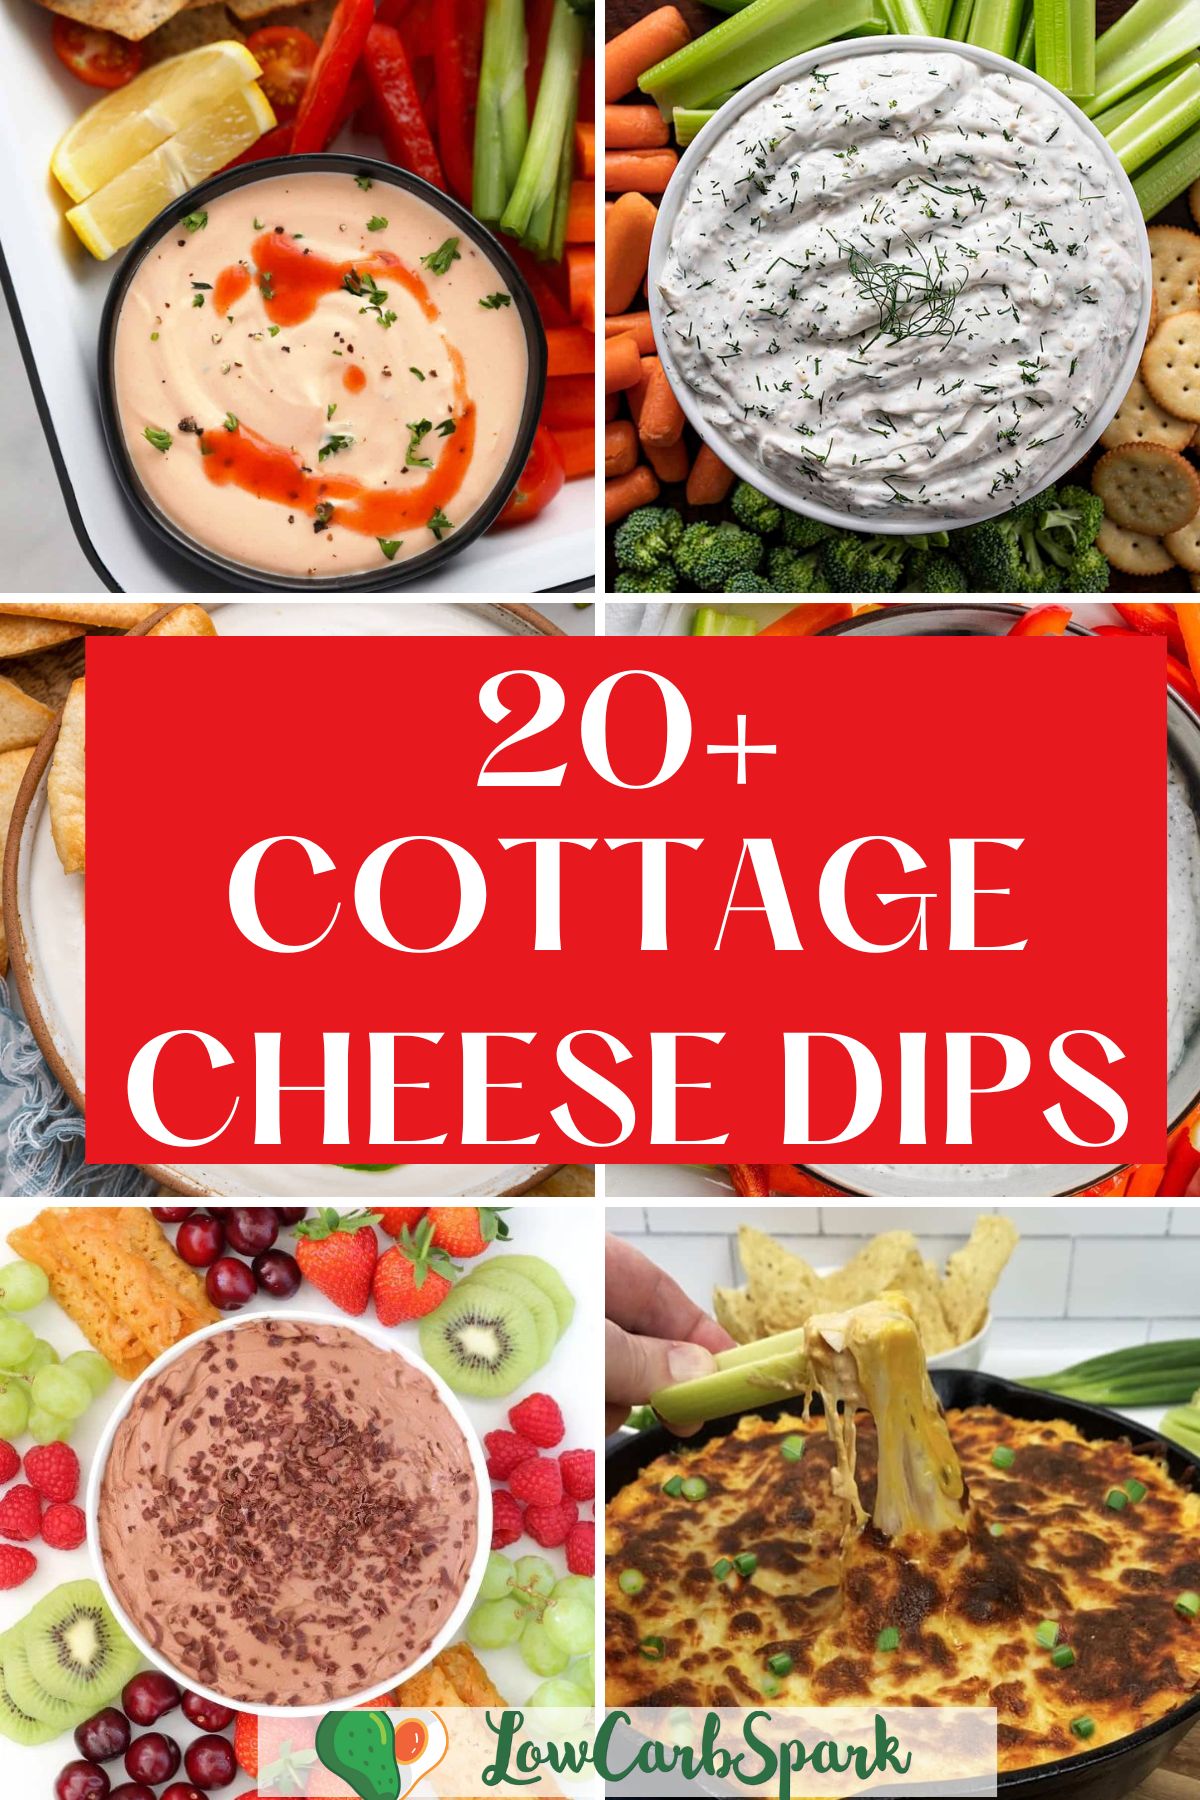  cottage cheese dips pinterest picture
